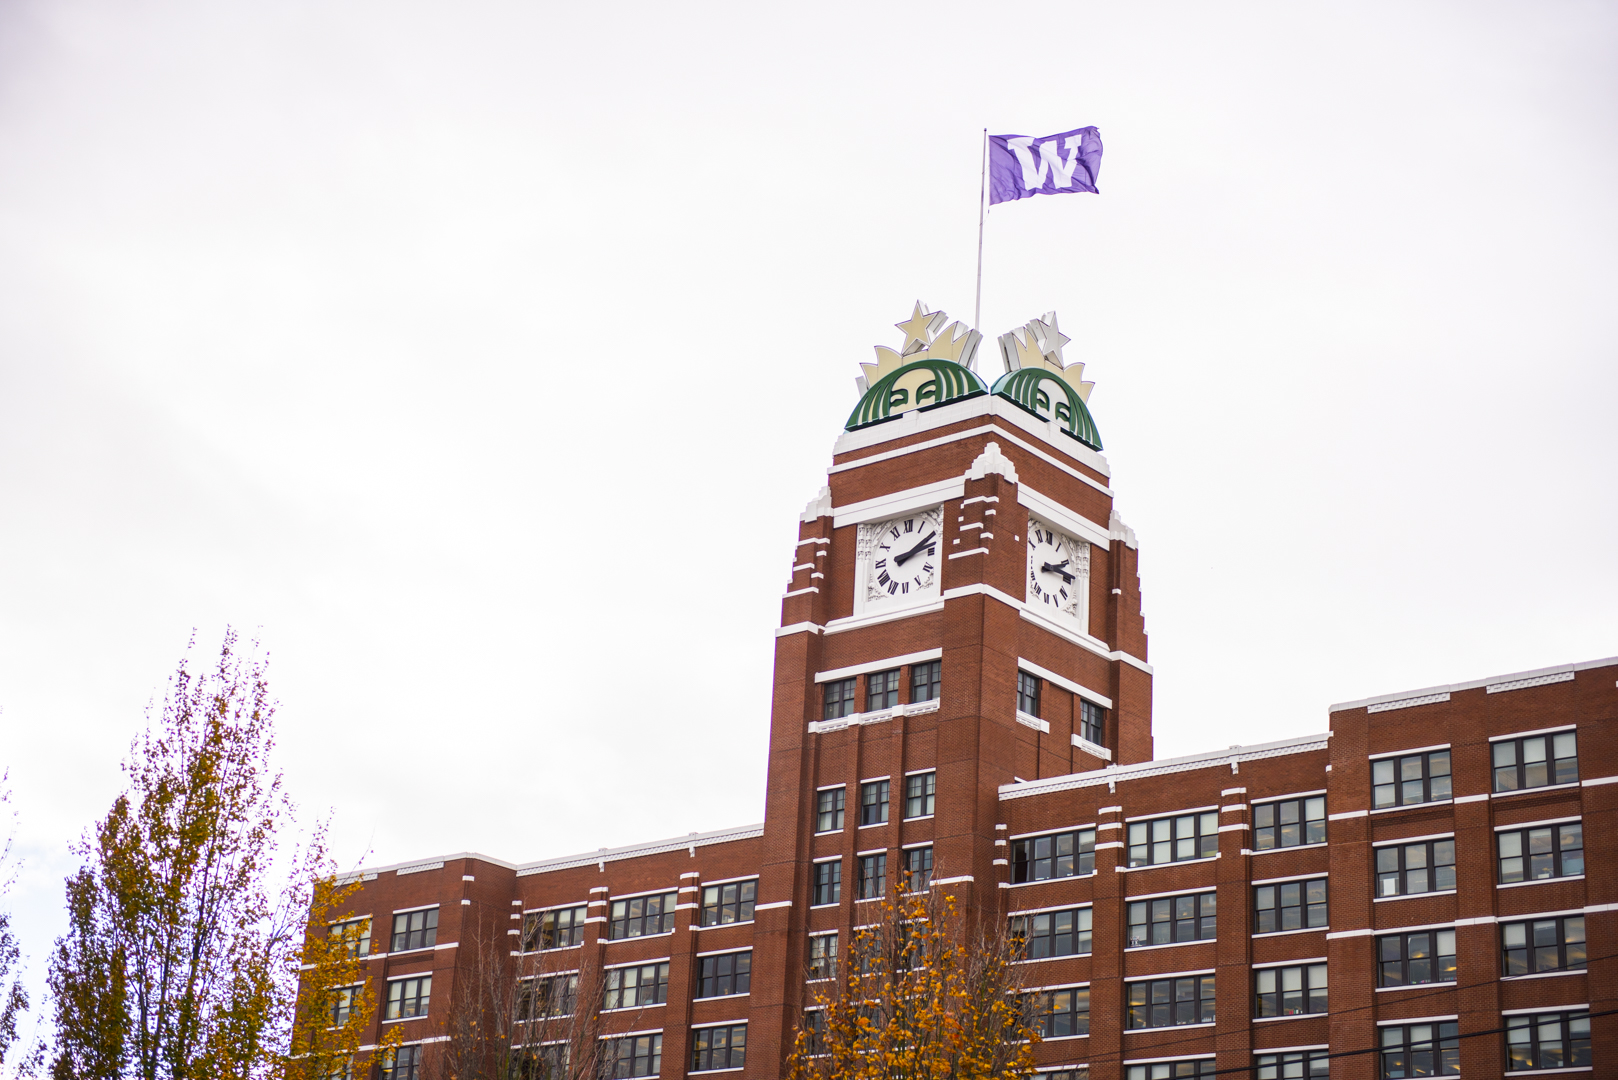 Starbucks headquarters building in SoDo with UW flag on top